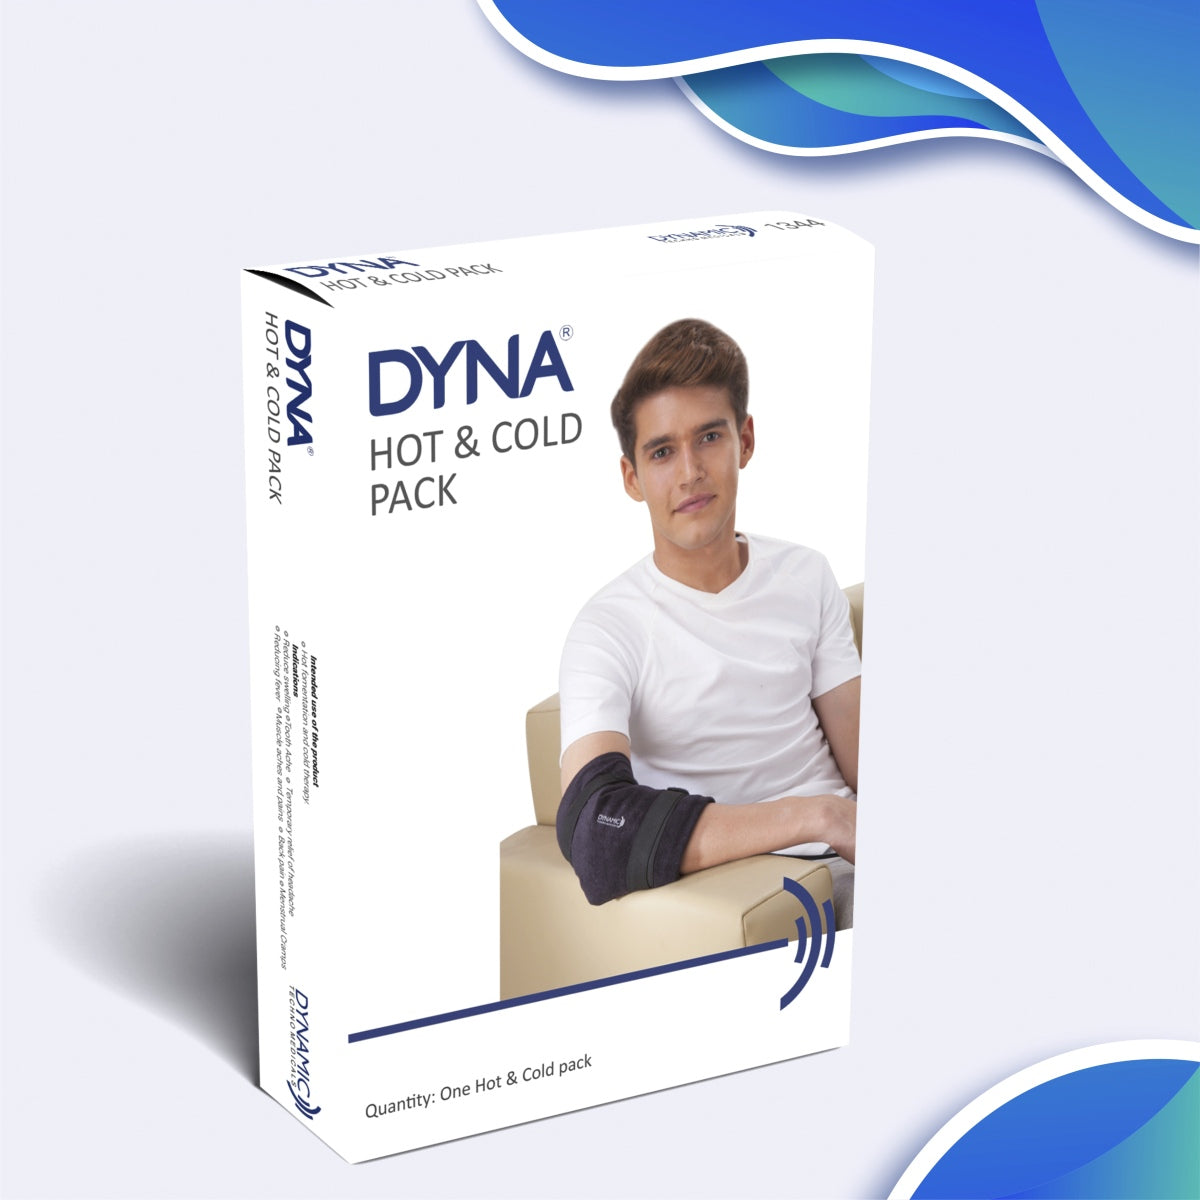 Dyna Hot & Cold Pack